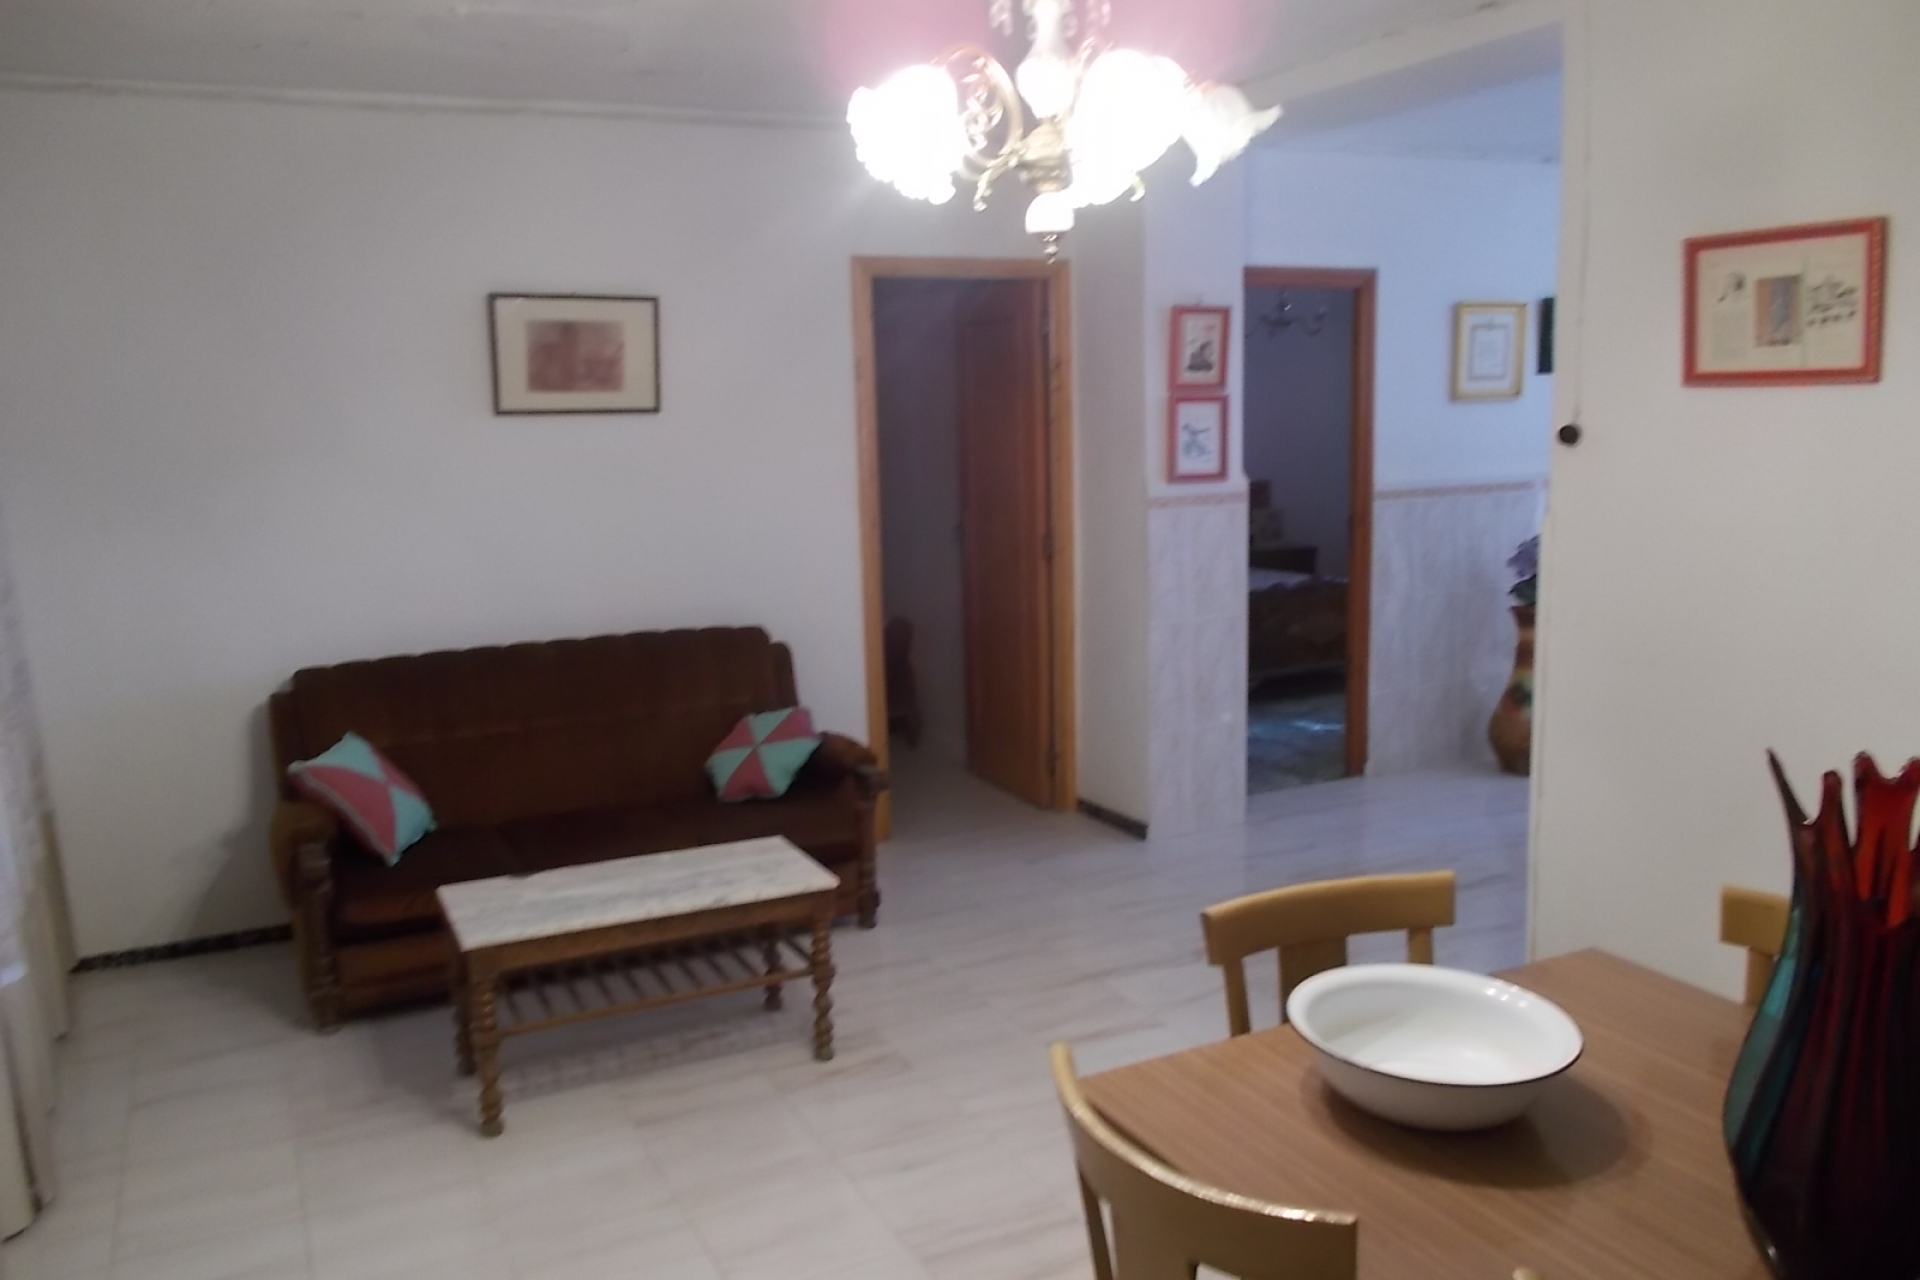 Property Sold - Townhouse for sale - Yecla - Raspay